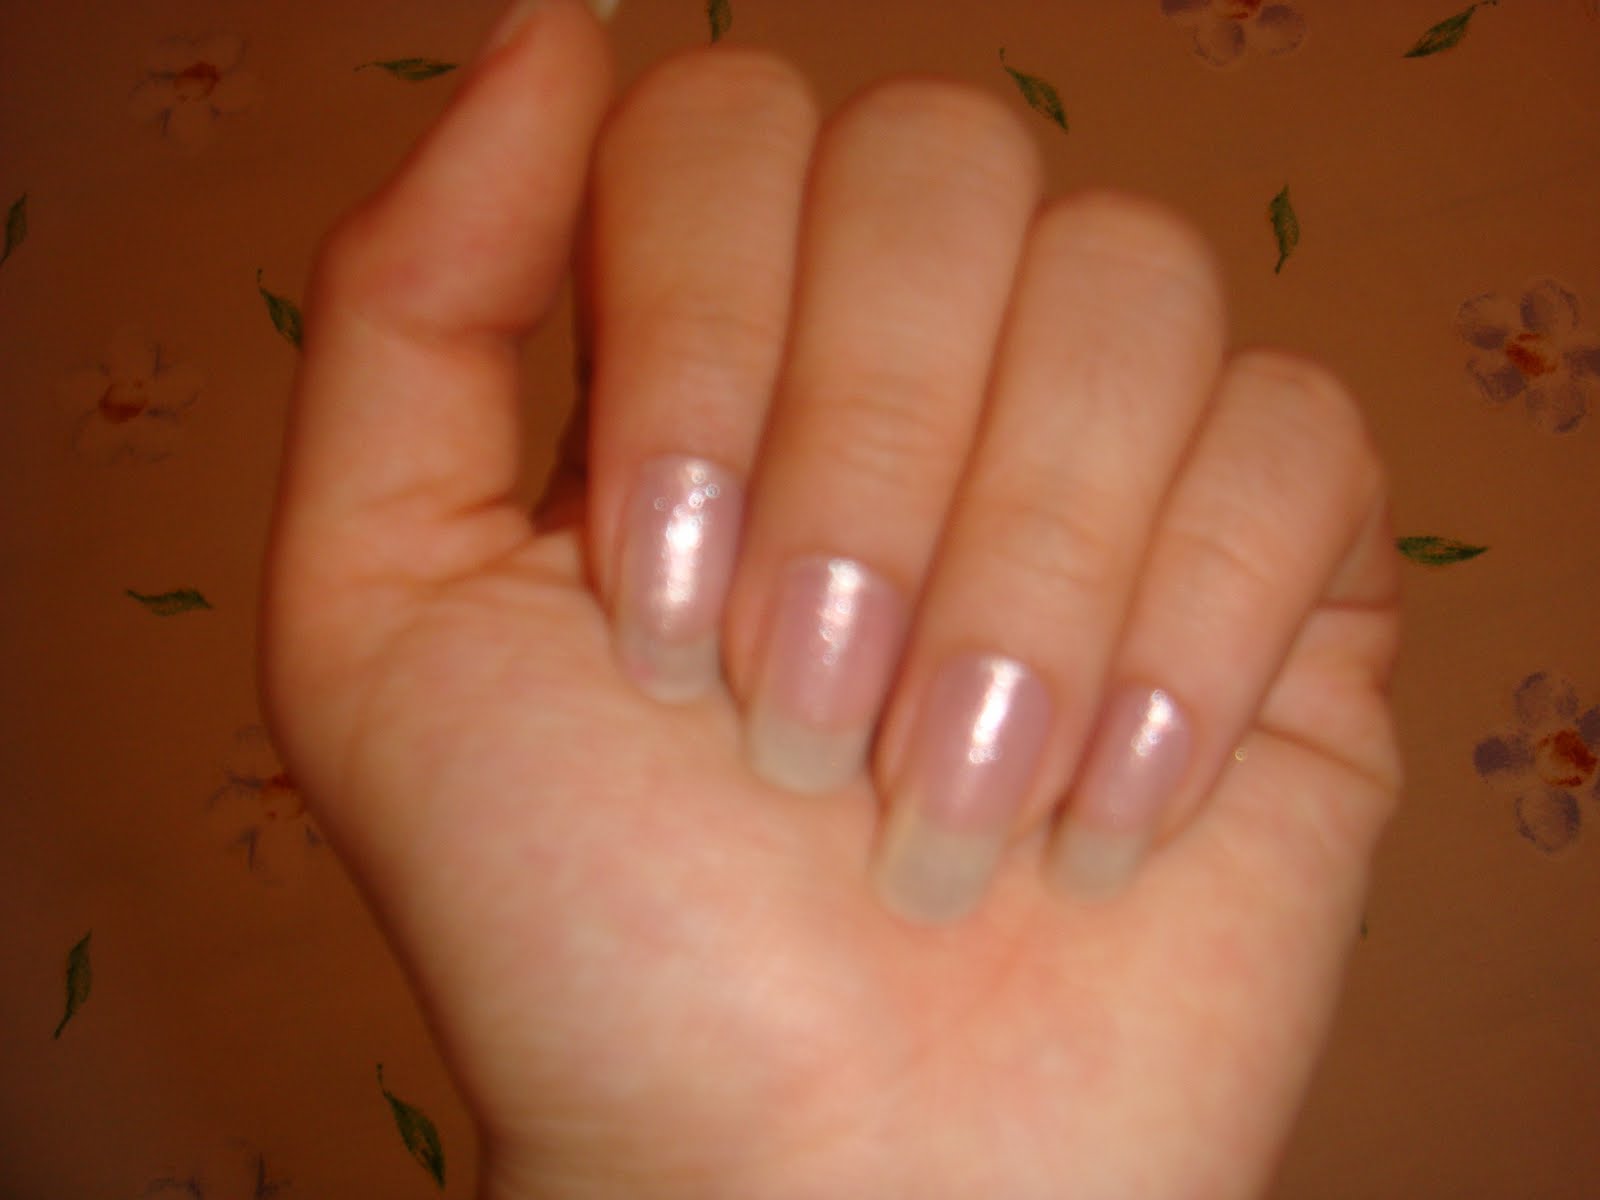 bye bye long nails. finally i decided to cut my nails yesterday =/